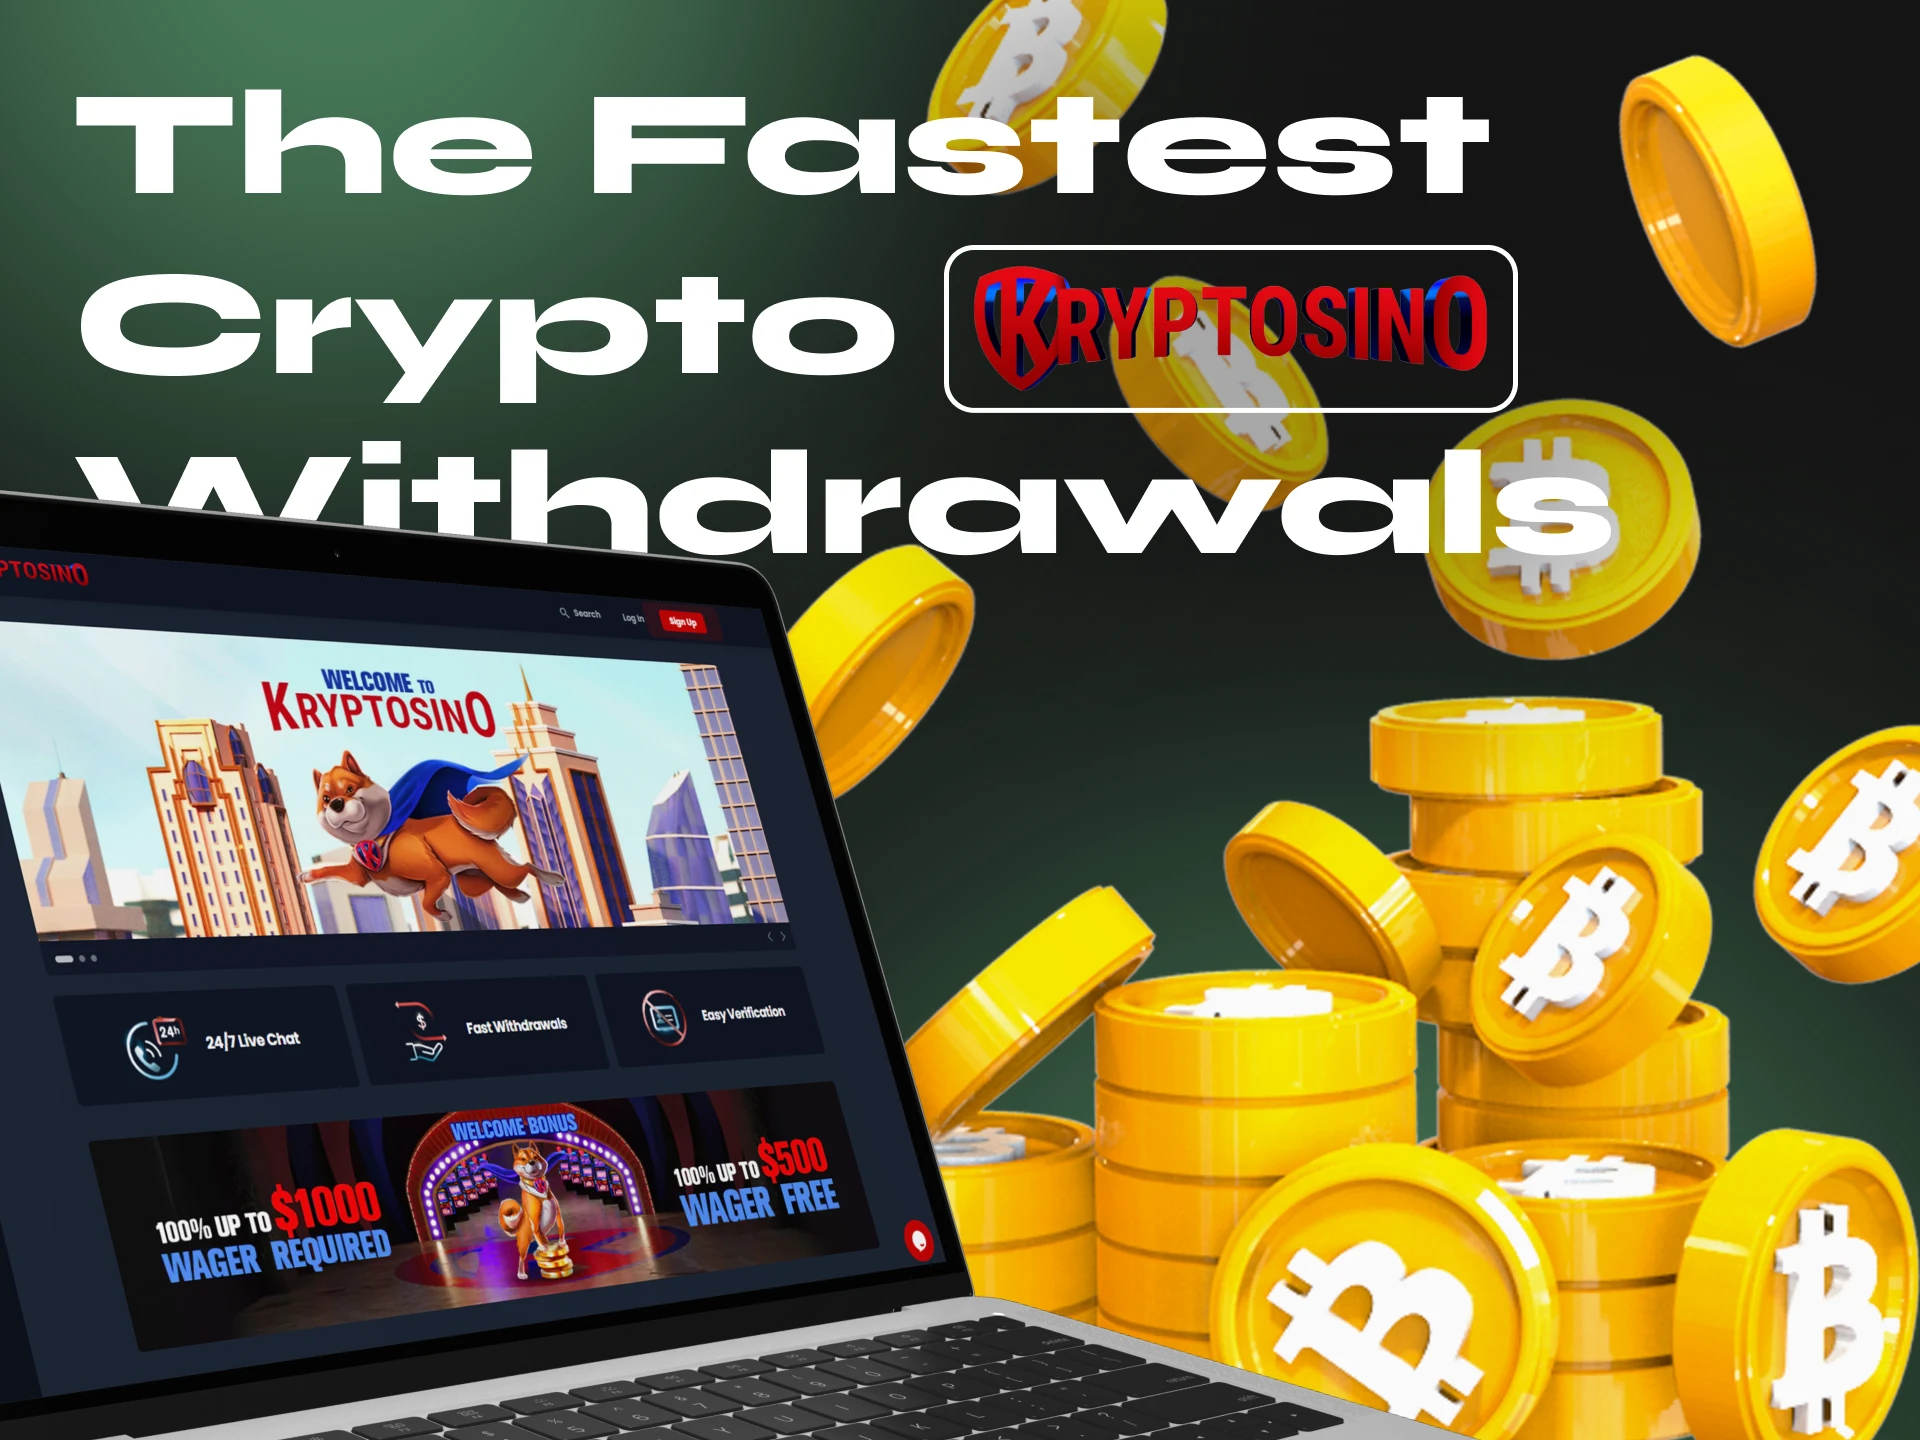 Withdraw your funds in seconds at Kryptosino crypto casino.